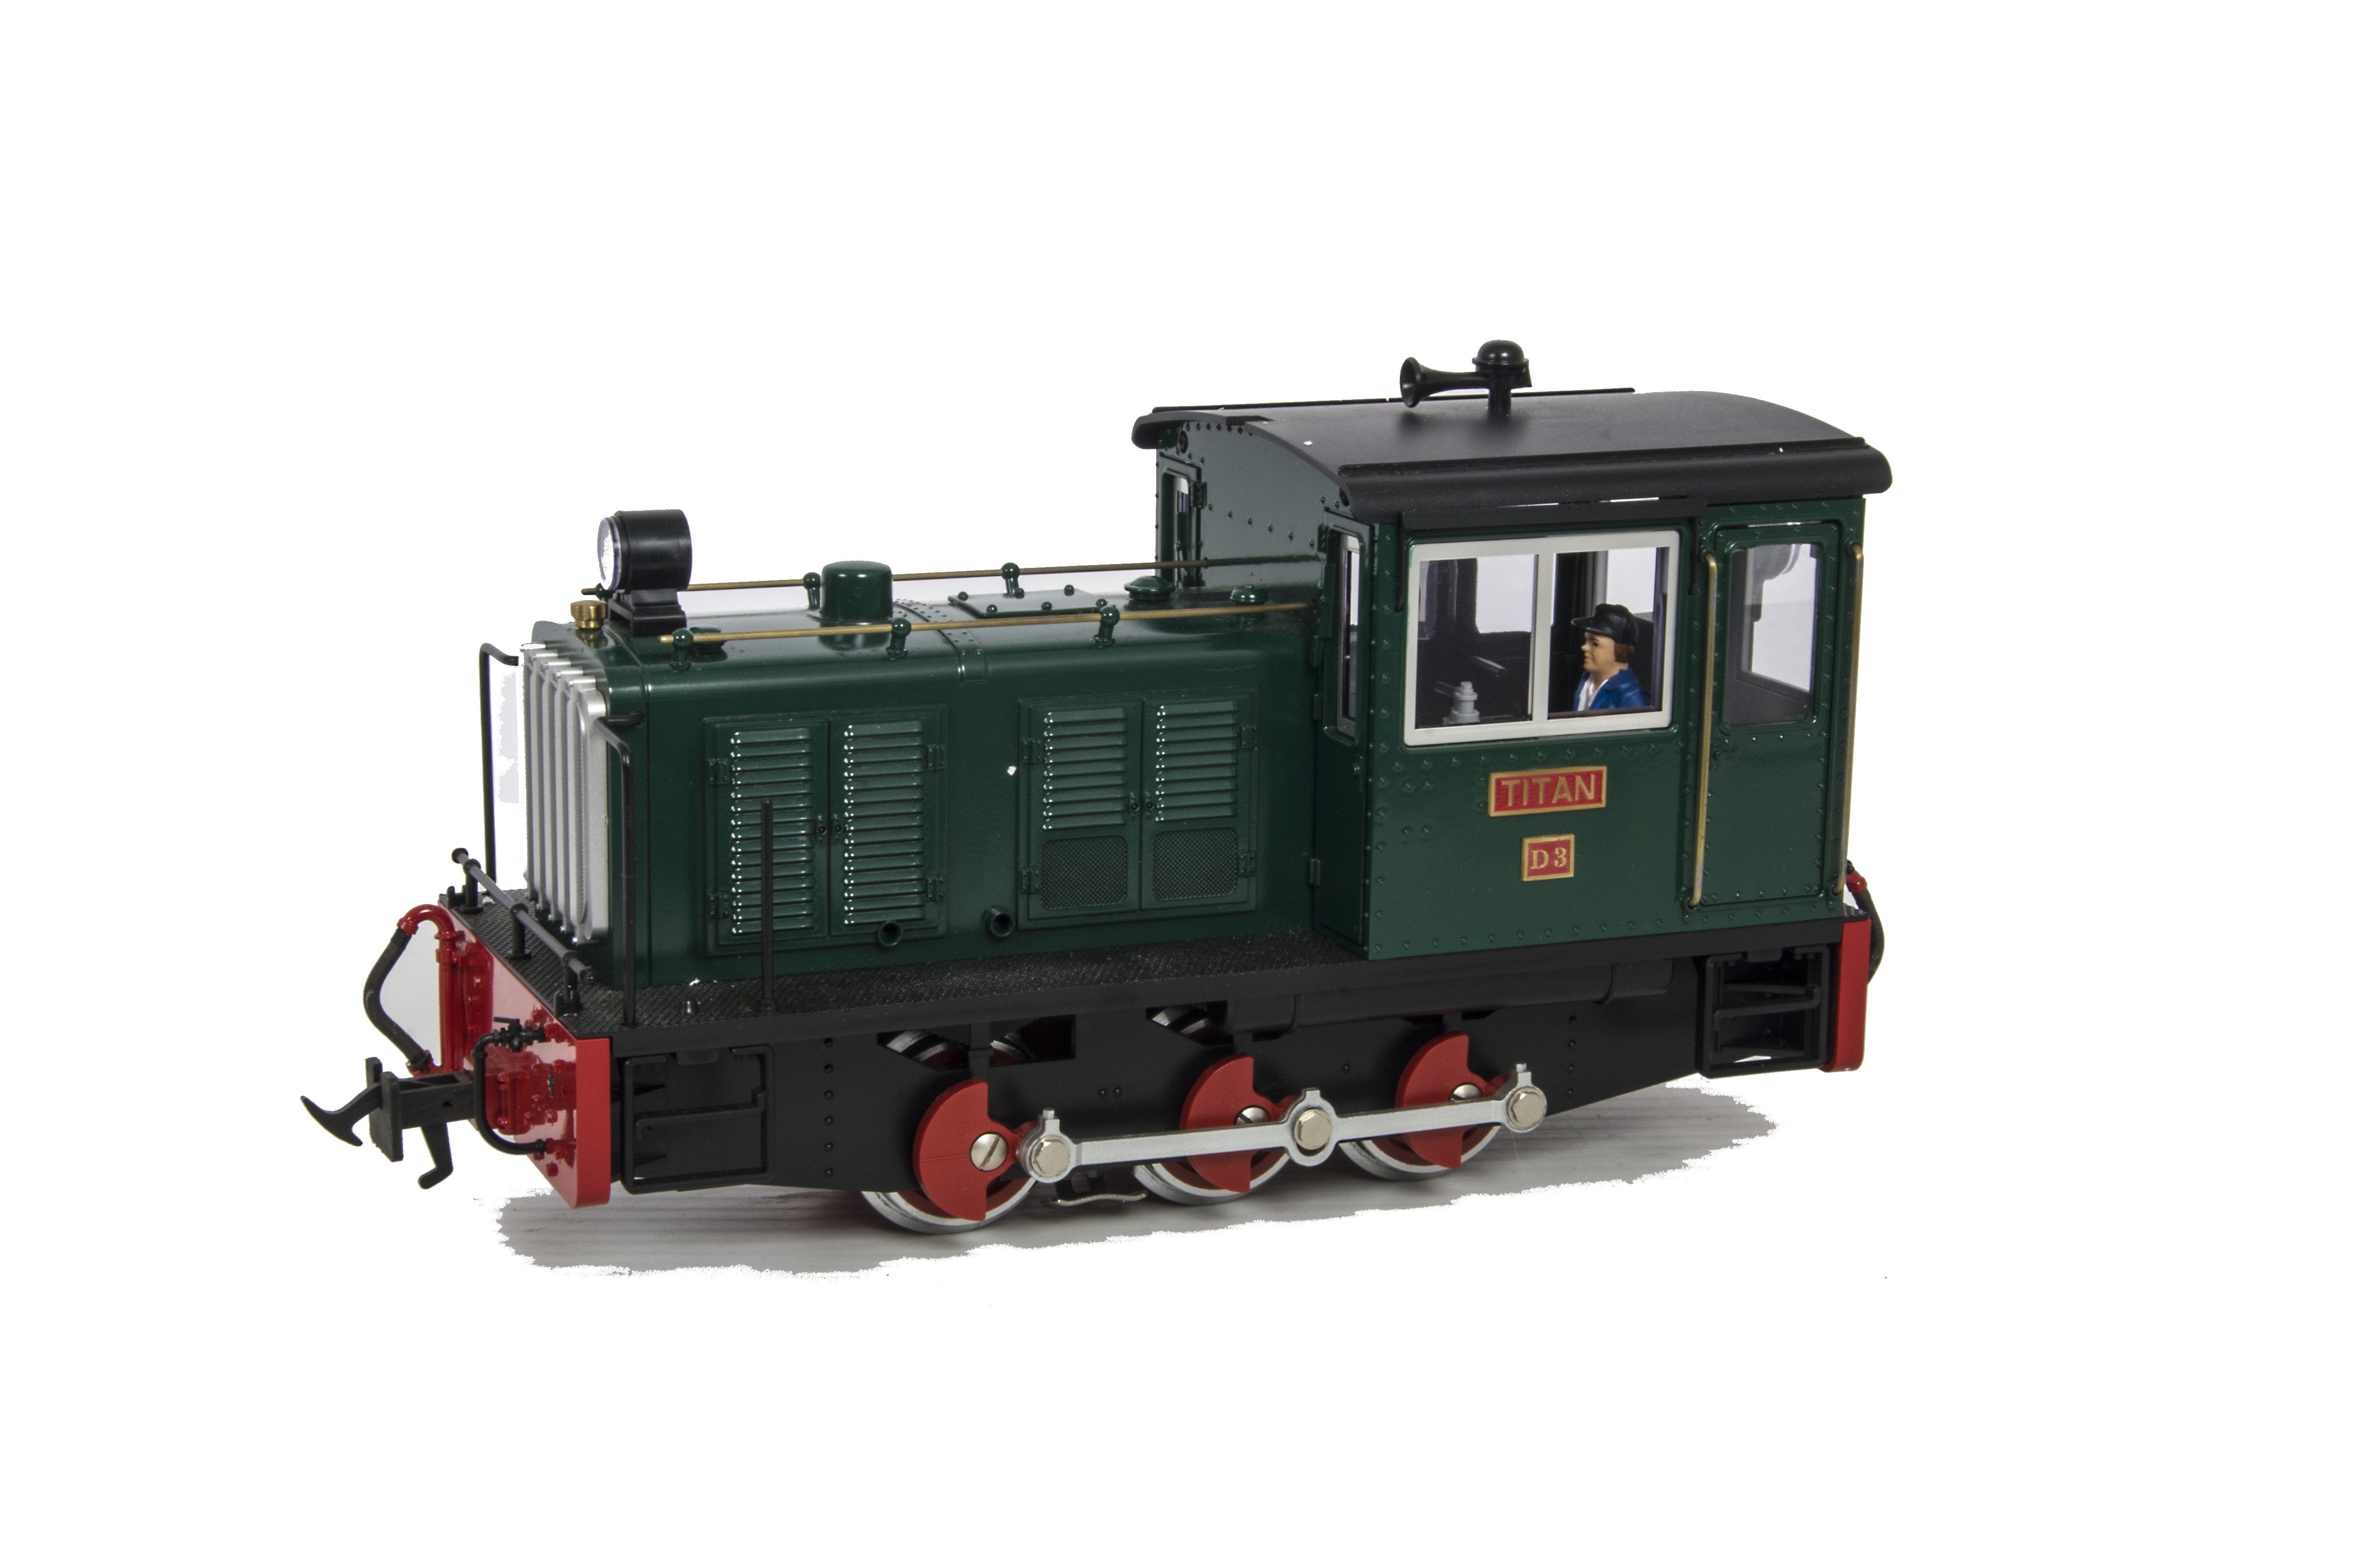 L.G.B. G Scale Shunter Locomotive, L.G.B. diesel shunter 0-6-0, with modified body work and